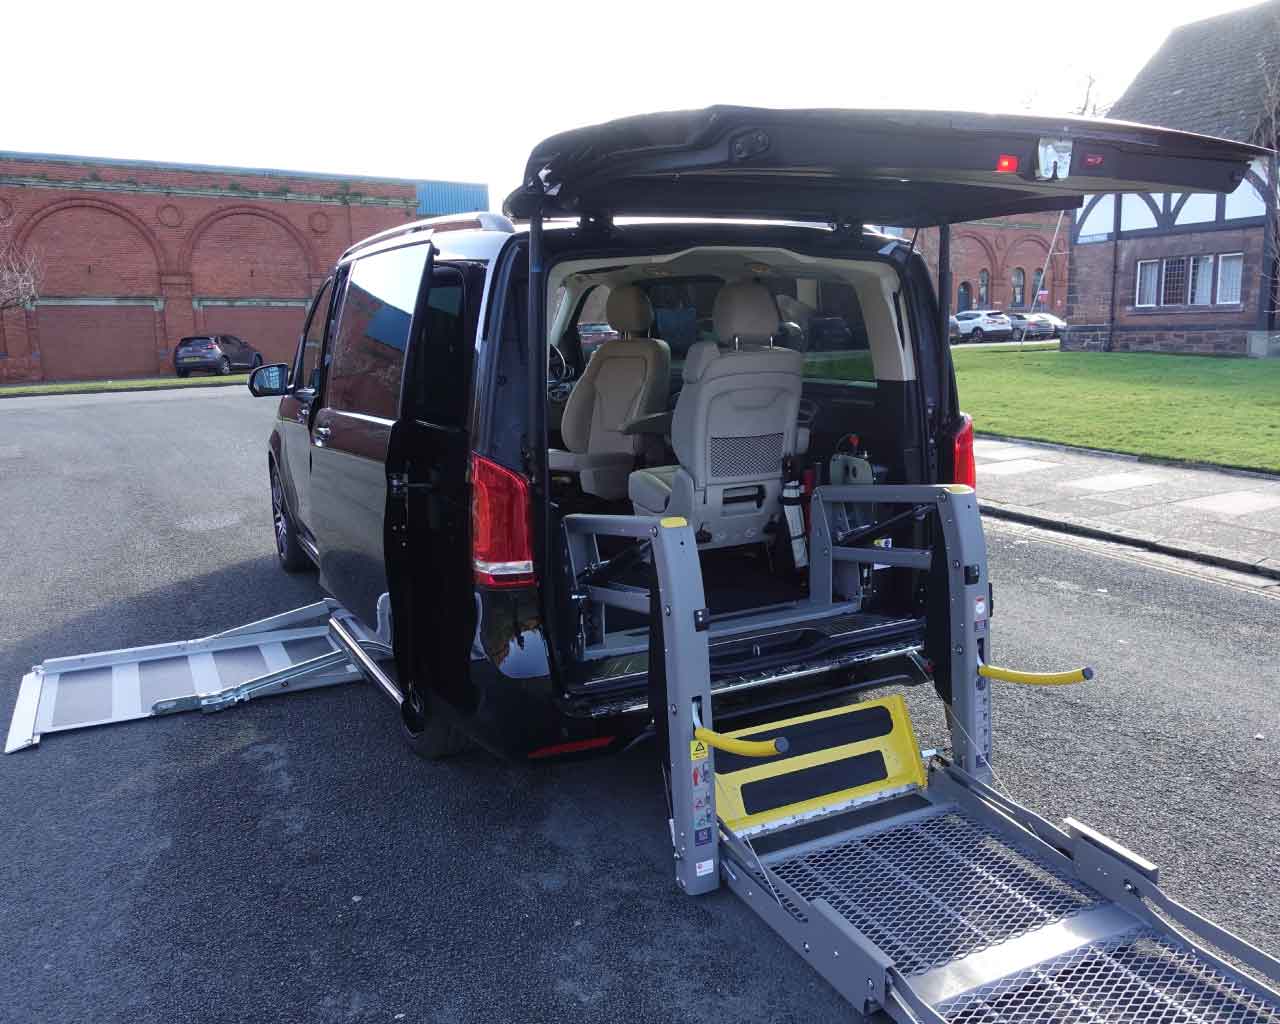 360° FRONT wheelchair view in NEW MB V-Class UpFront demo drive in Lewis  Reed's conversion 